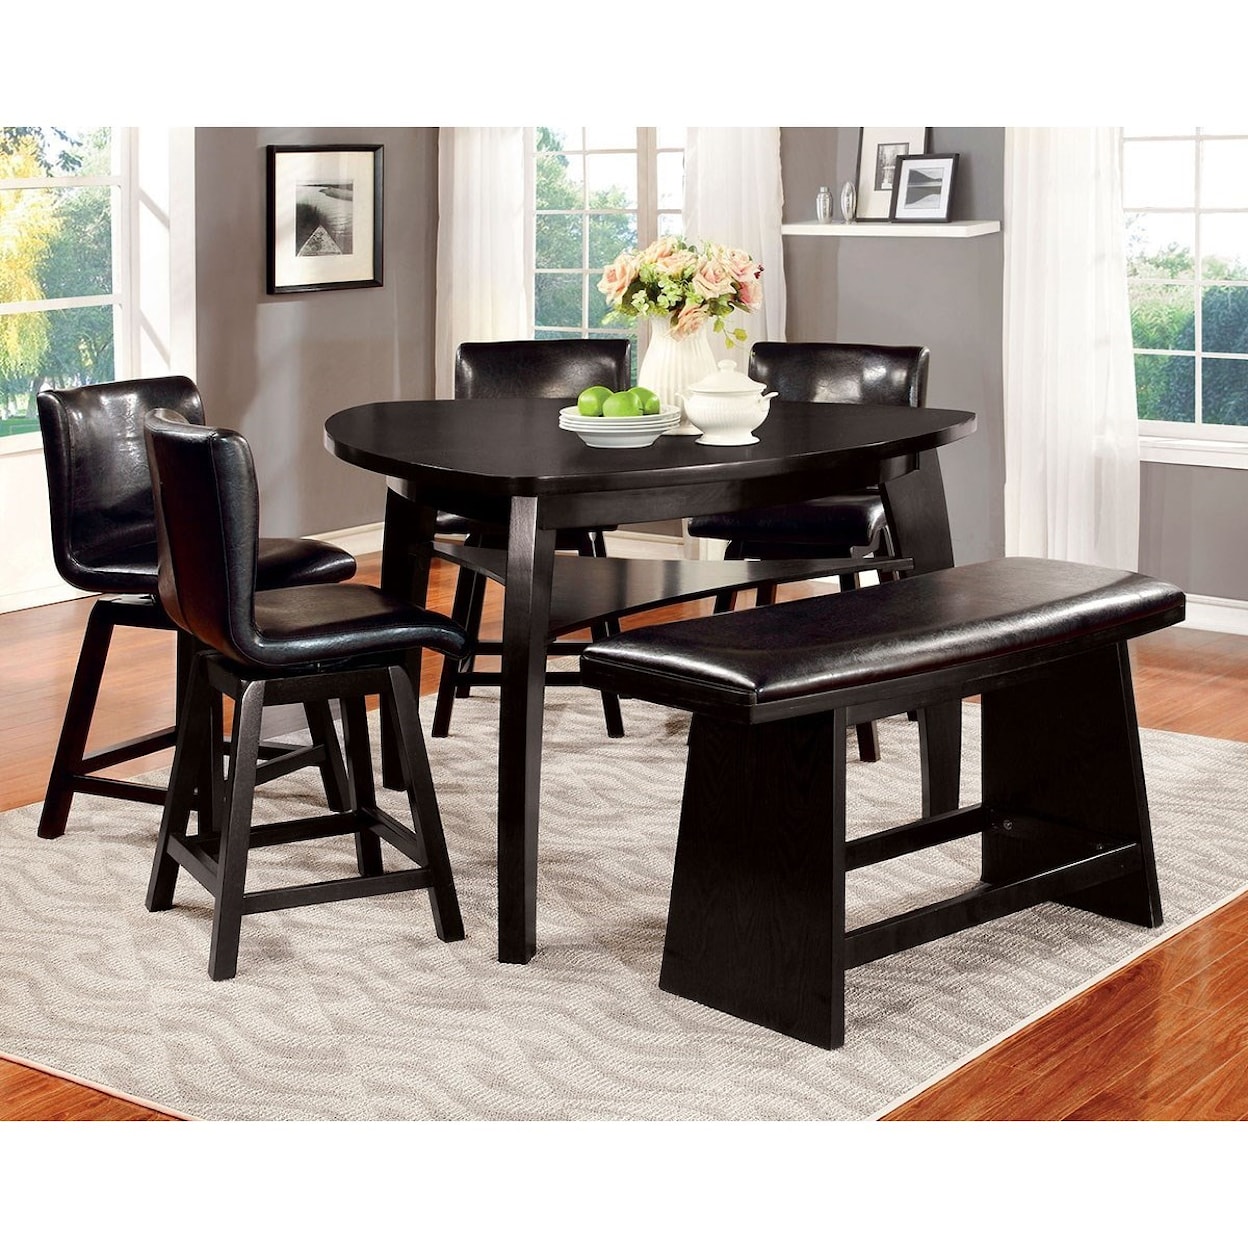 Furniture of America Hurley Table, 4 Chairs and Bench Set